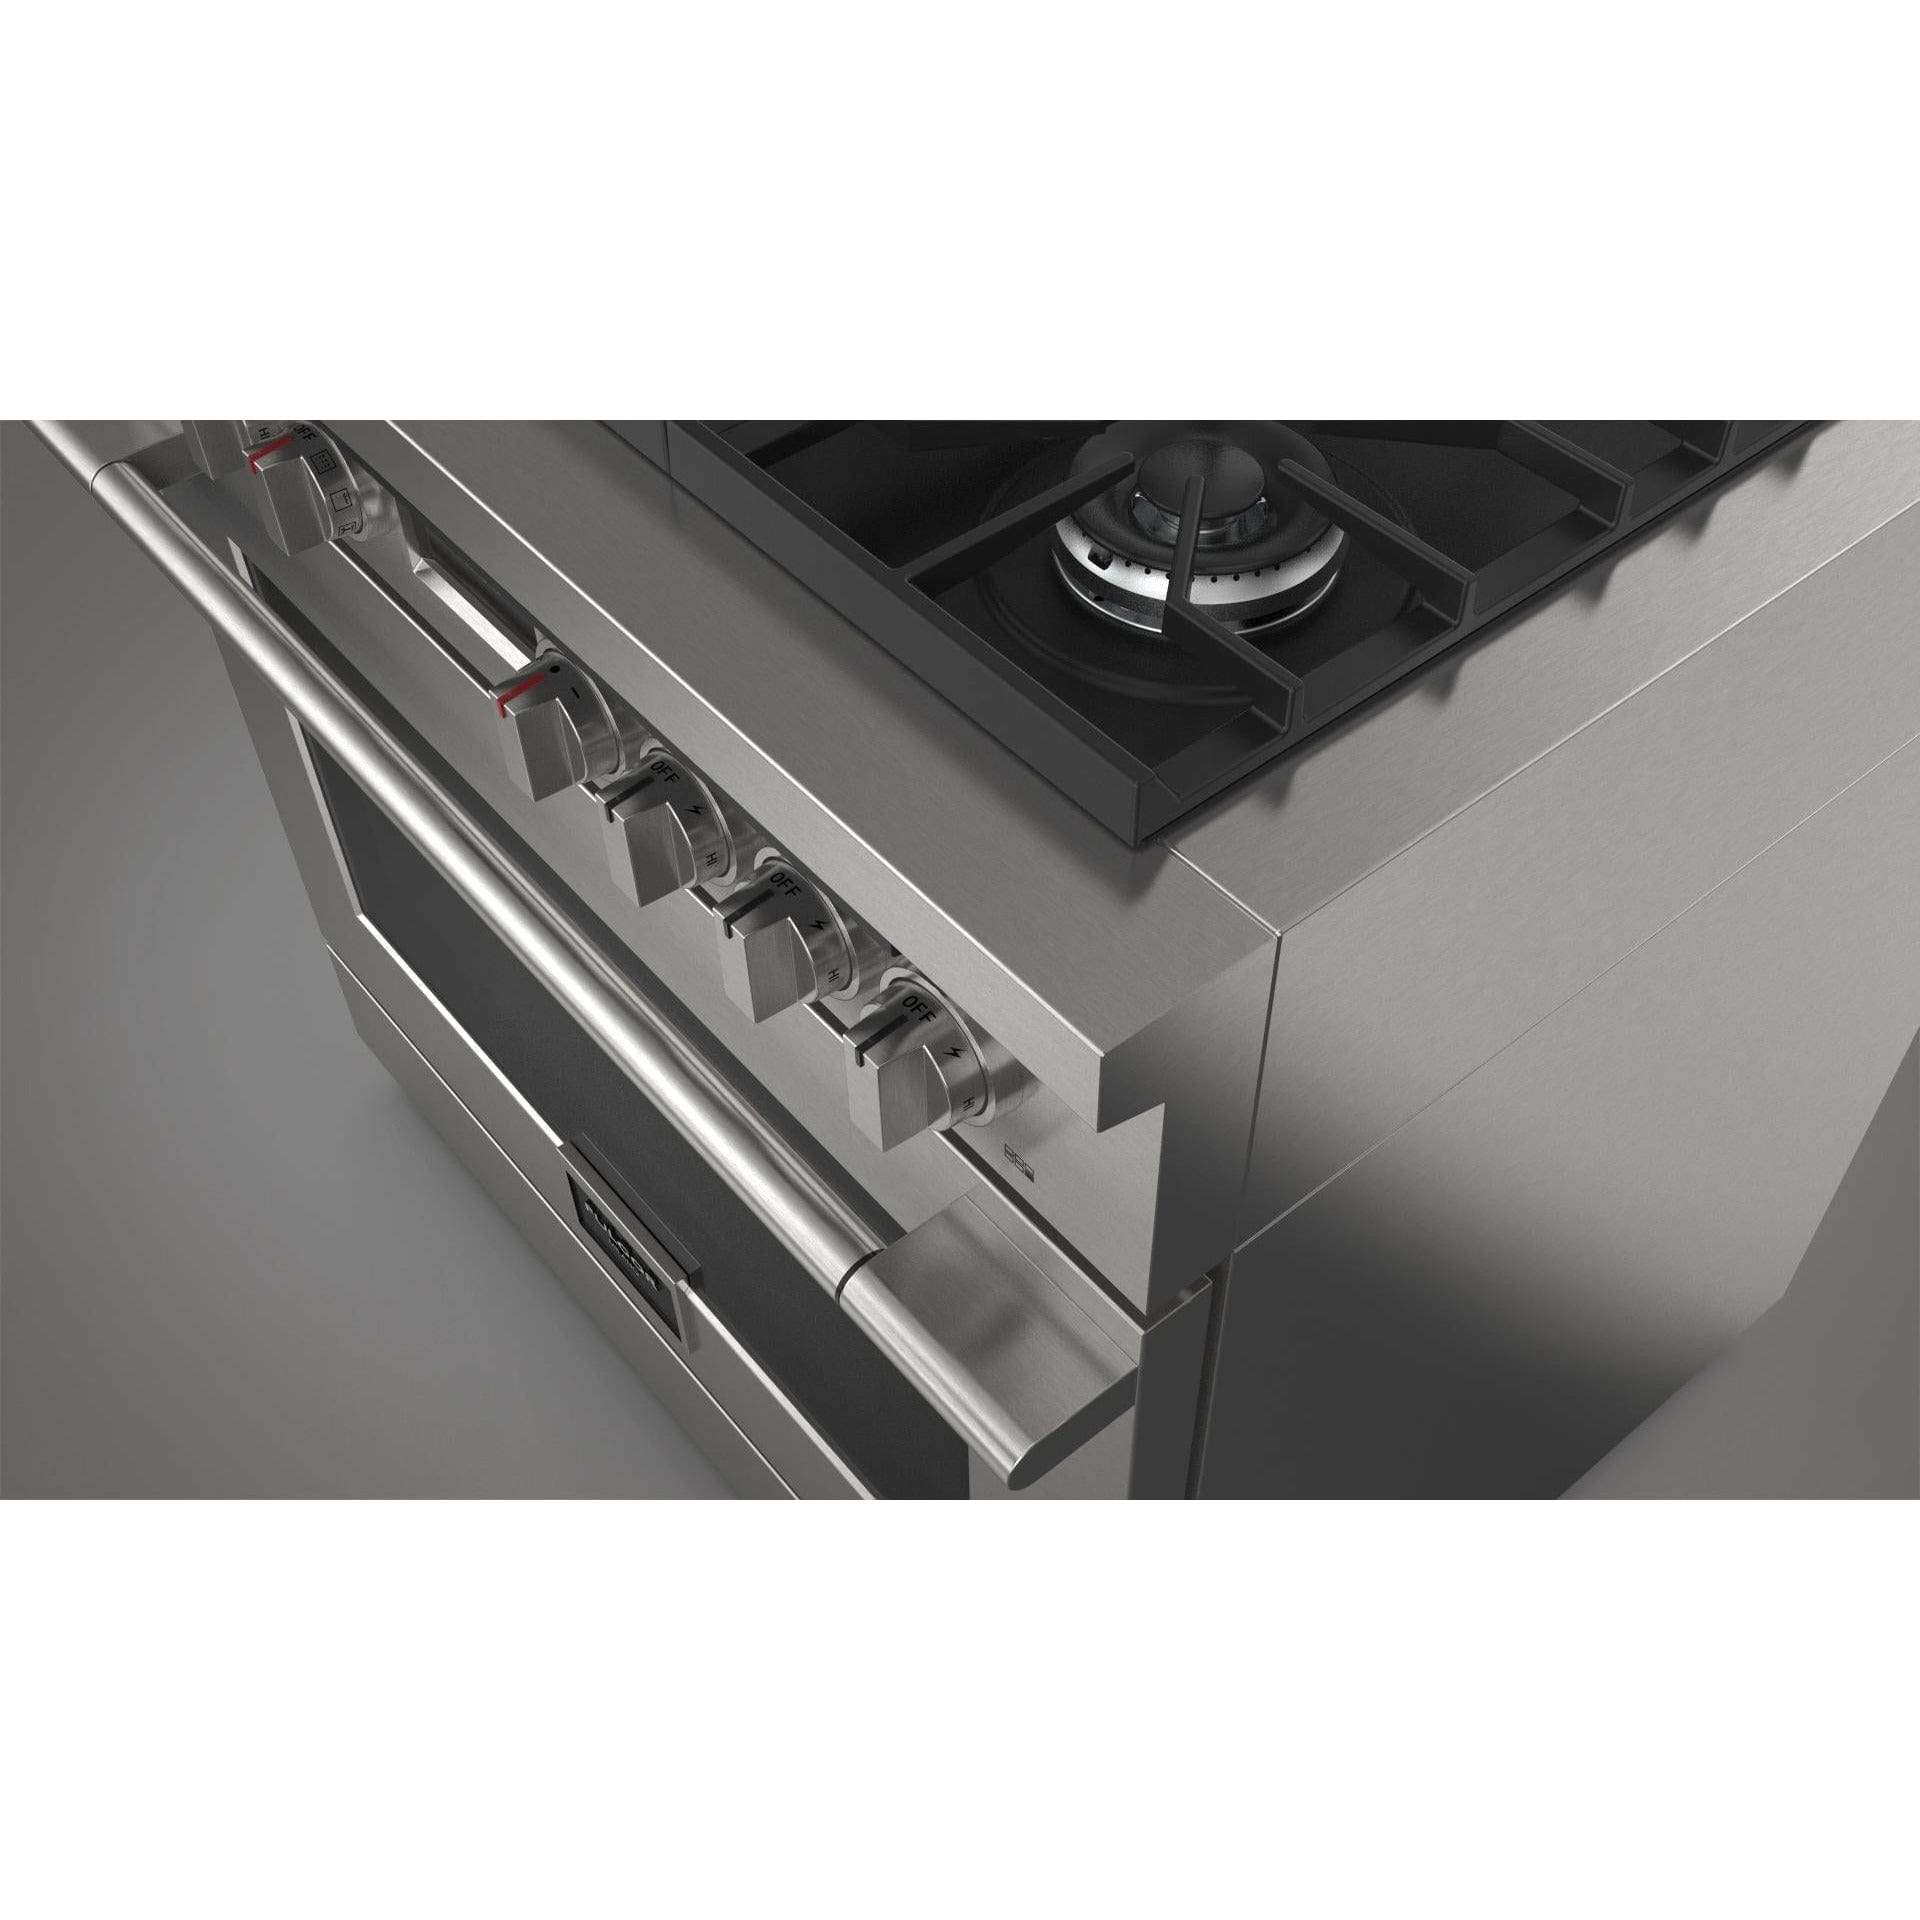 Fulgor Milano 36" Pro-Style Dual Fuel Range with 5.7 Cu. Ft. Capacity, Stainless Steel - F4PDF366S1 Ranges Luxury Appliances Direct